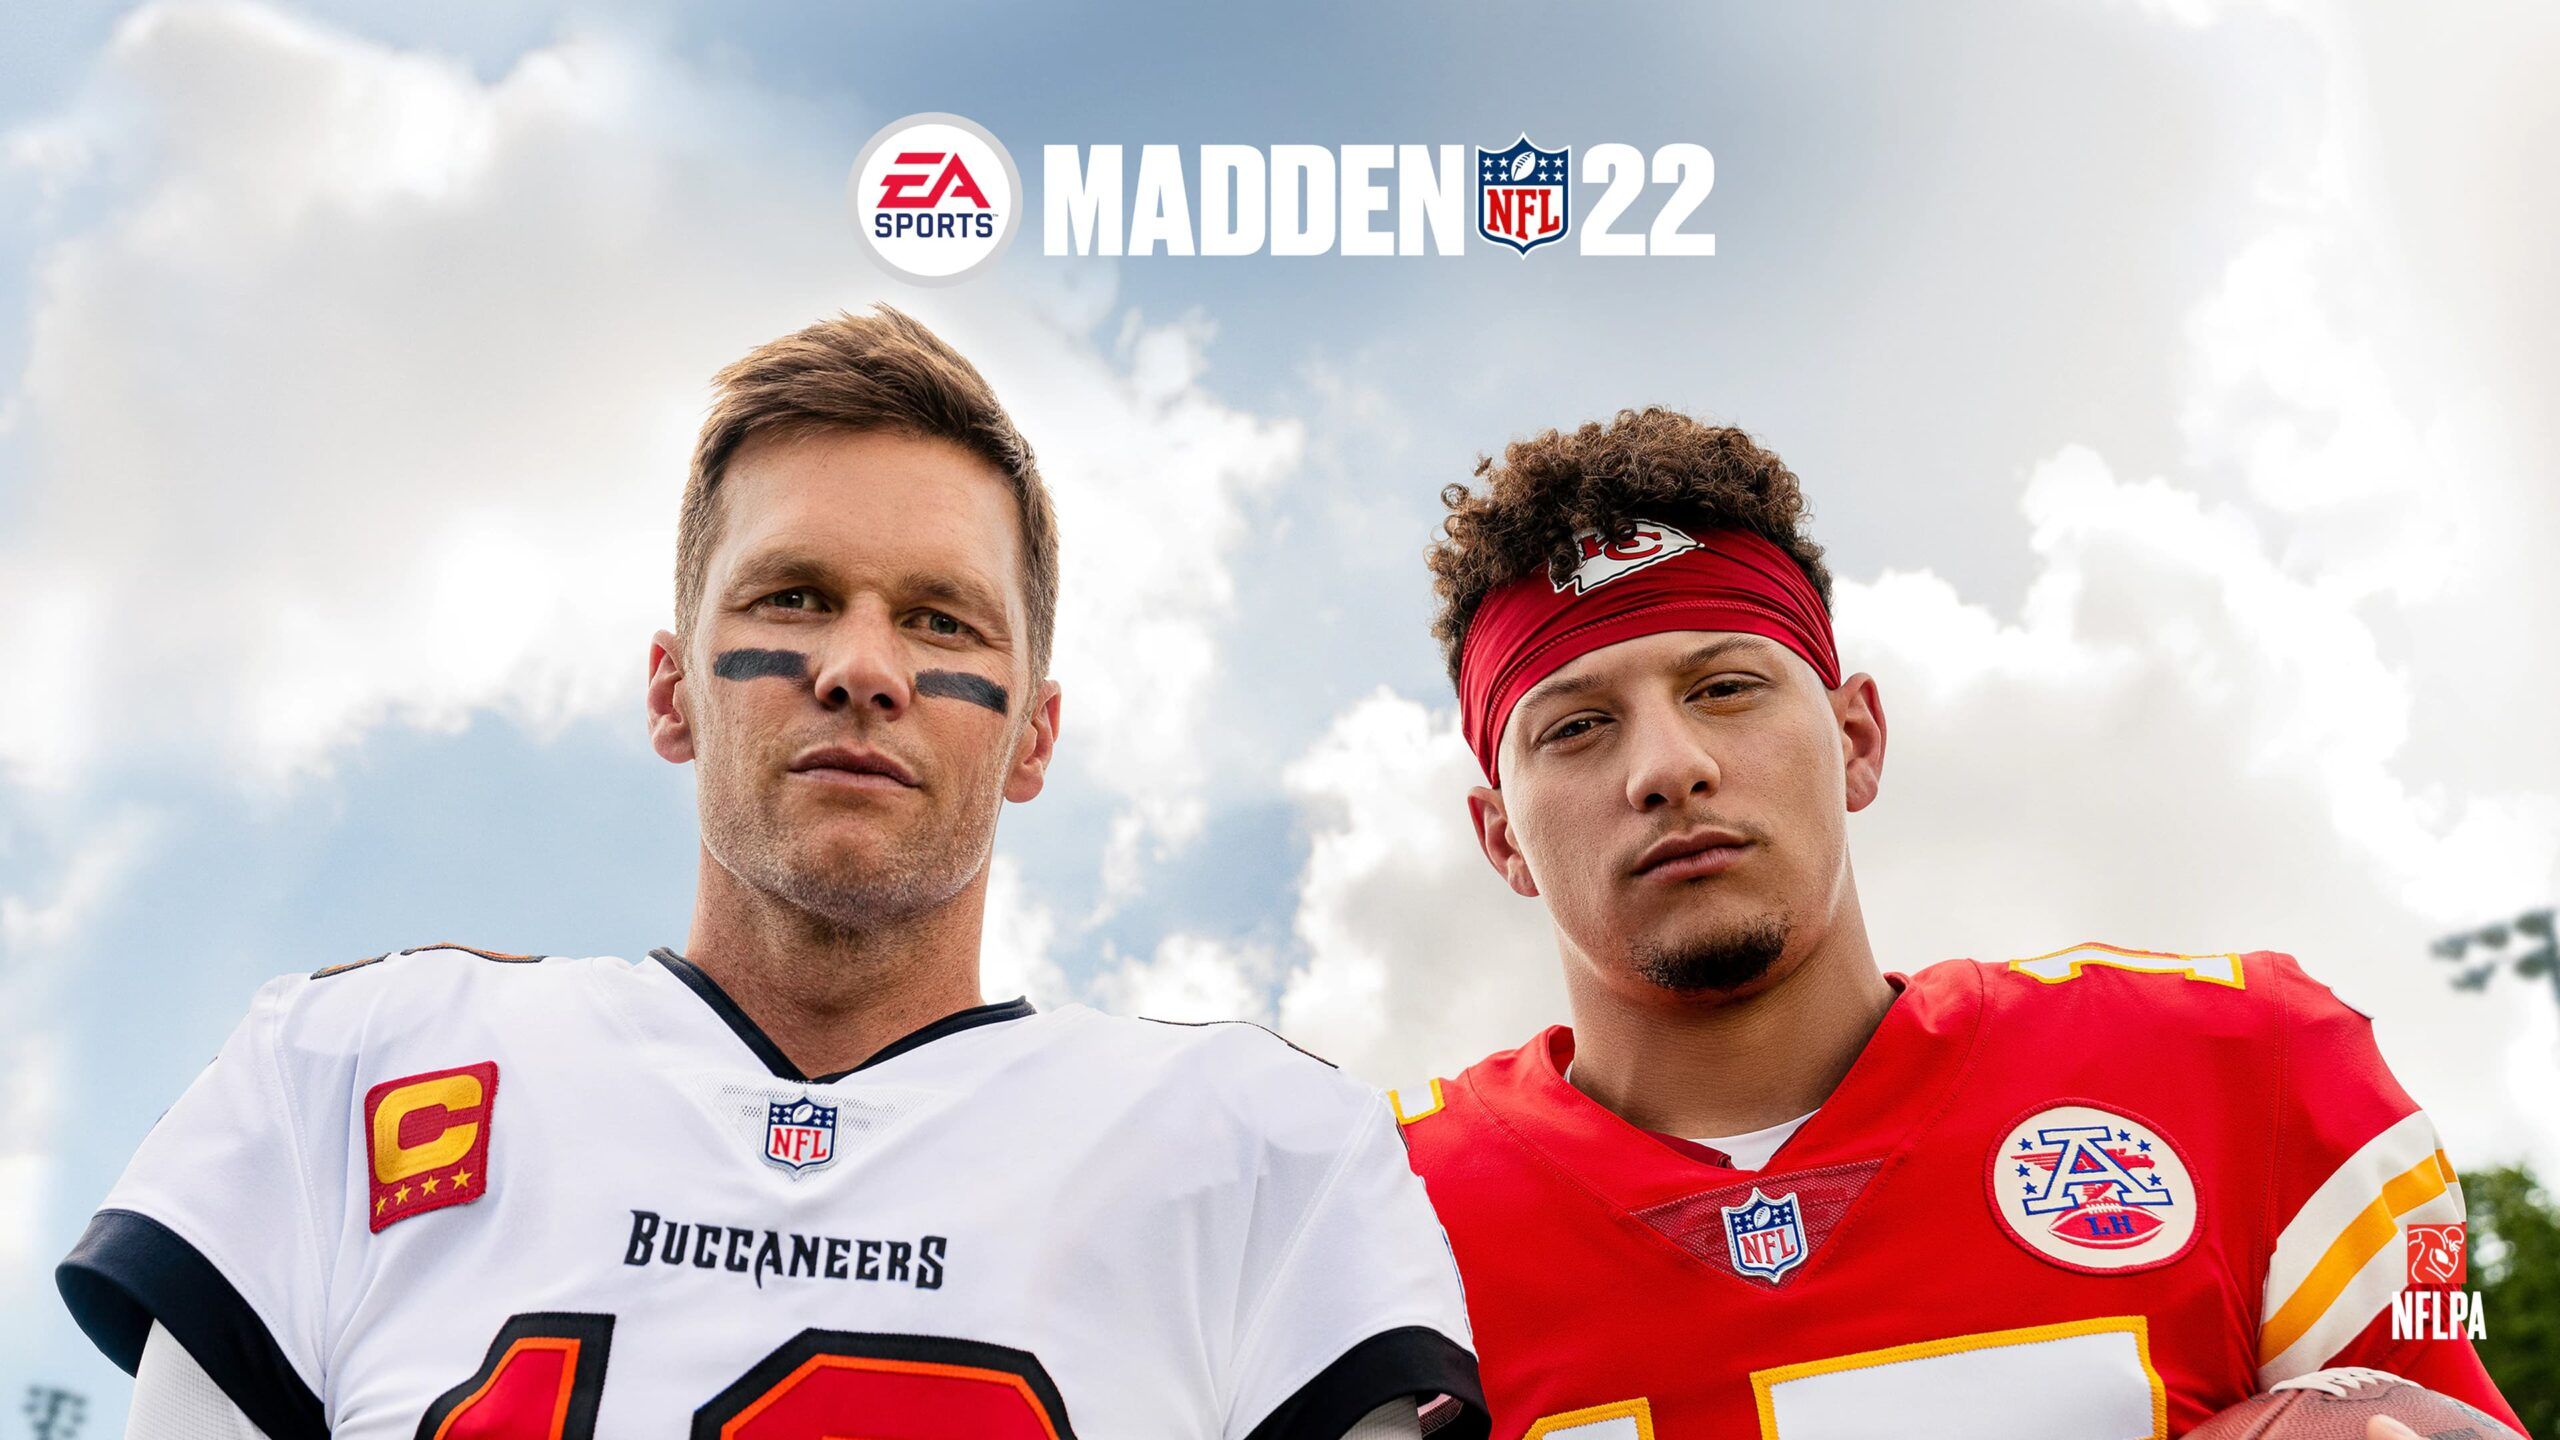 Madden NFL 22 Update Today - Patch Notes (September 2nd)